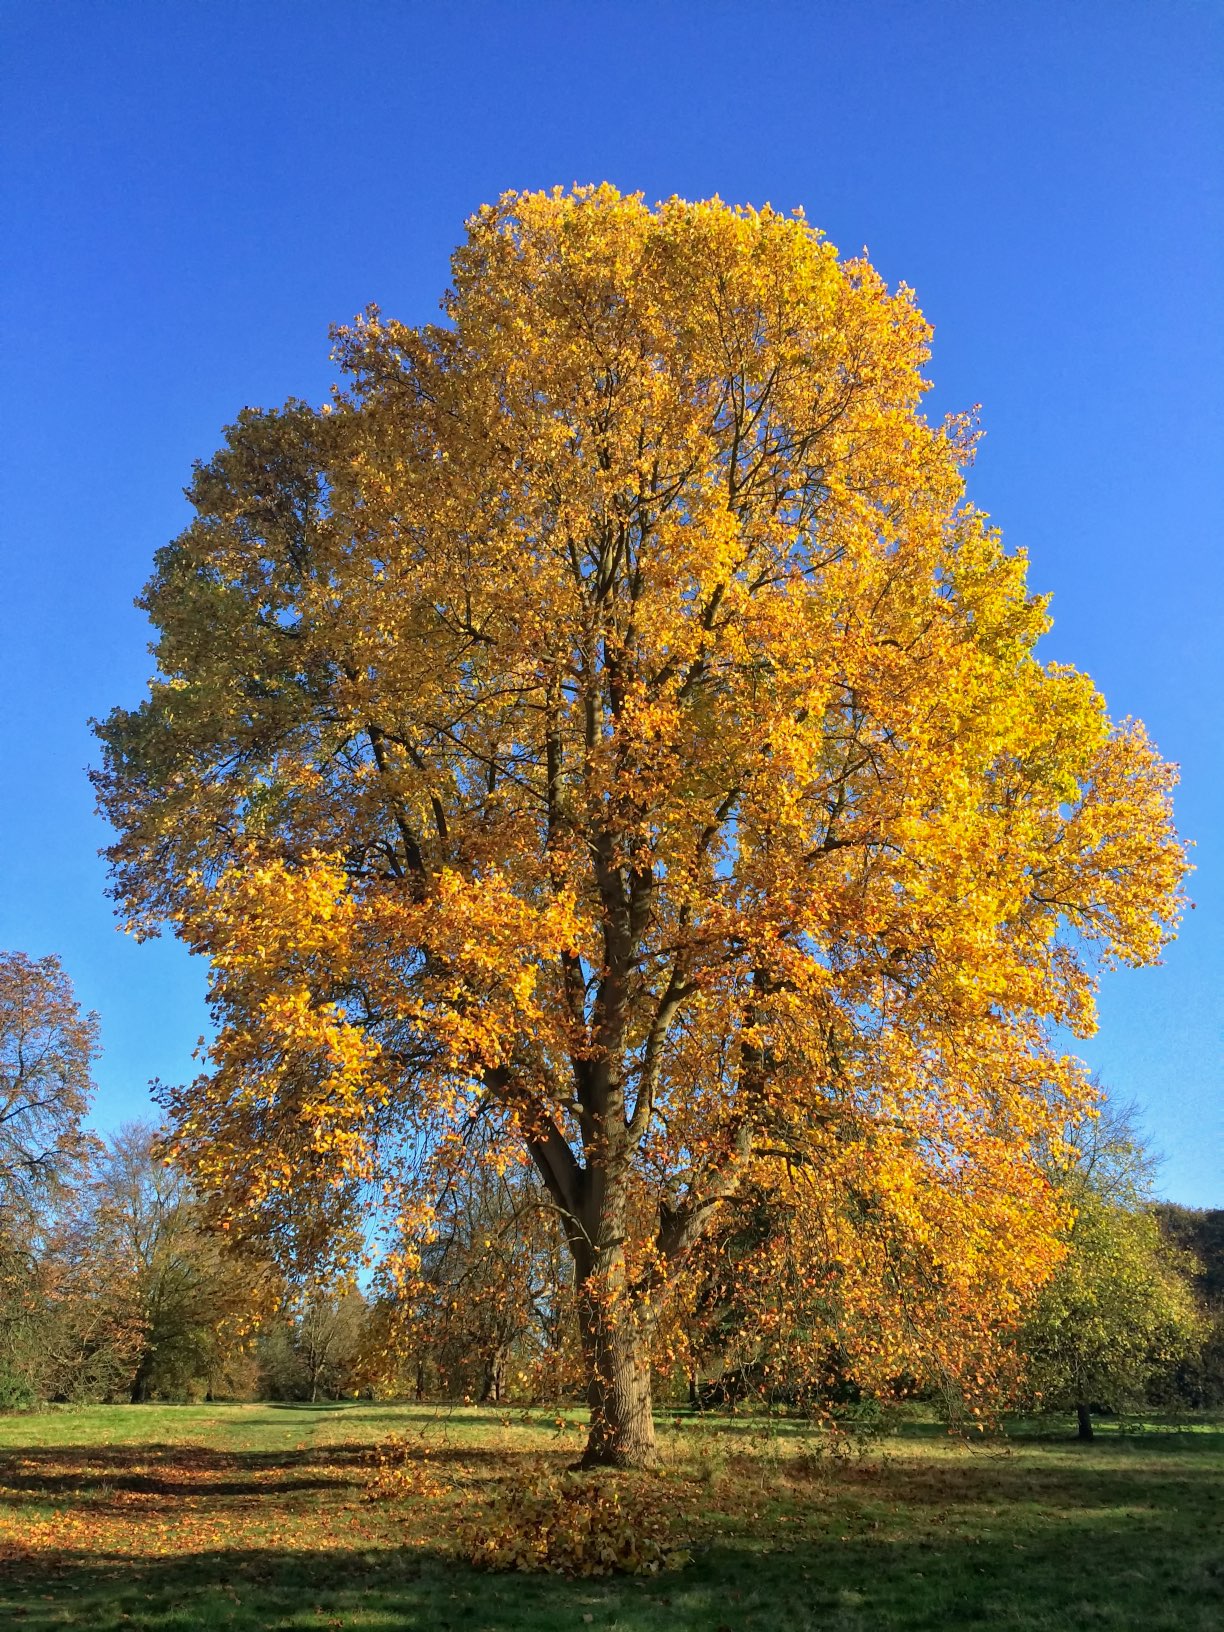 a large leafed tree is standing in the middle of an area